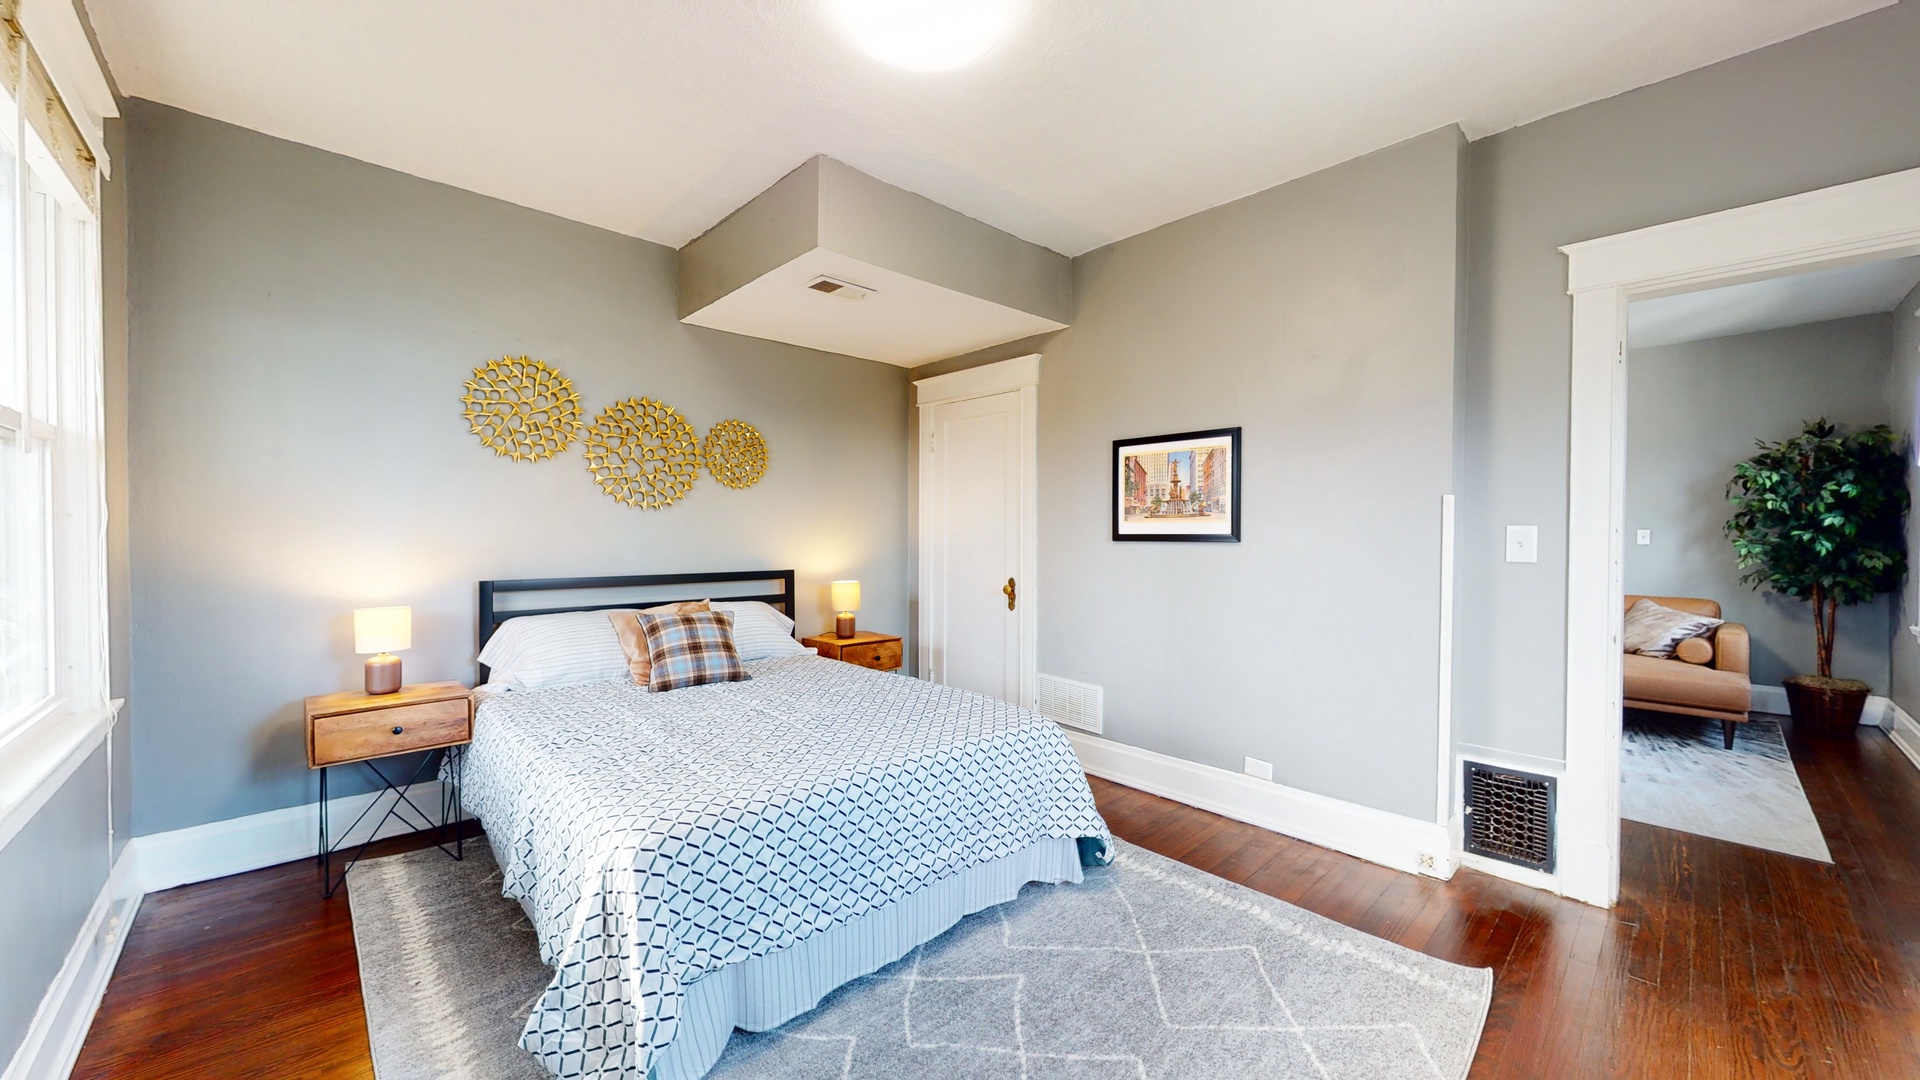 Cityscape tranquility awaits in the master bedroom, with a chic queen bed & private balcony